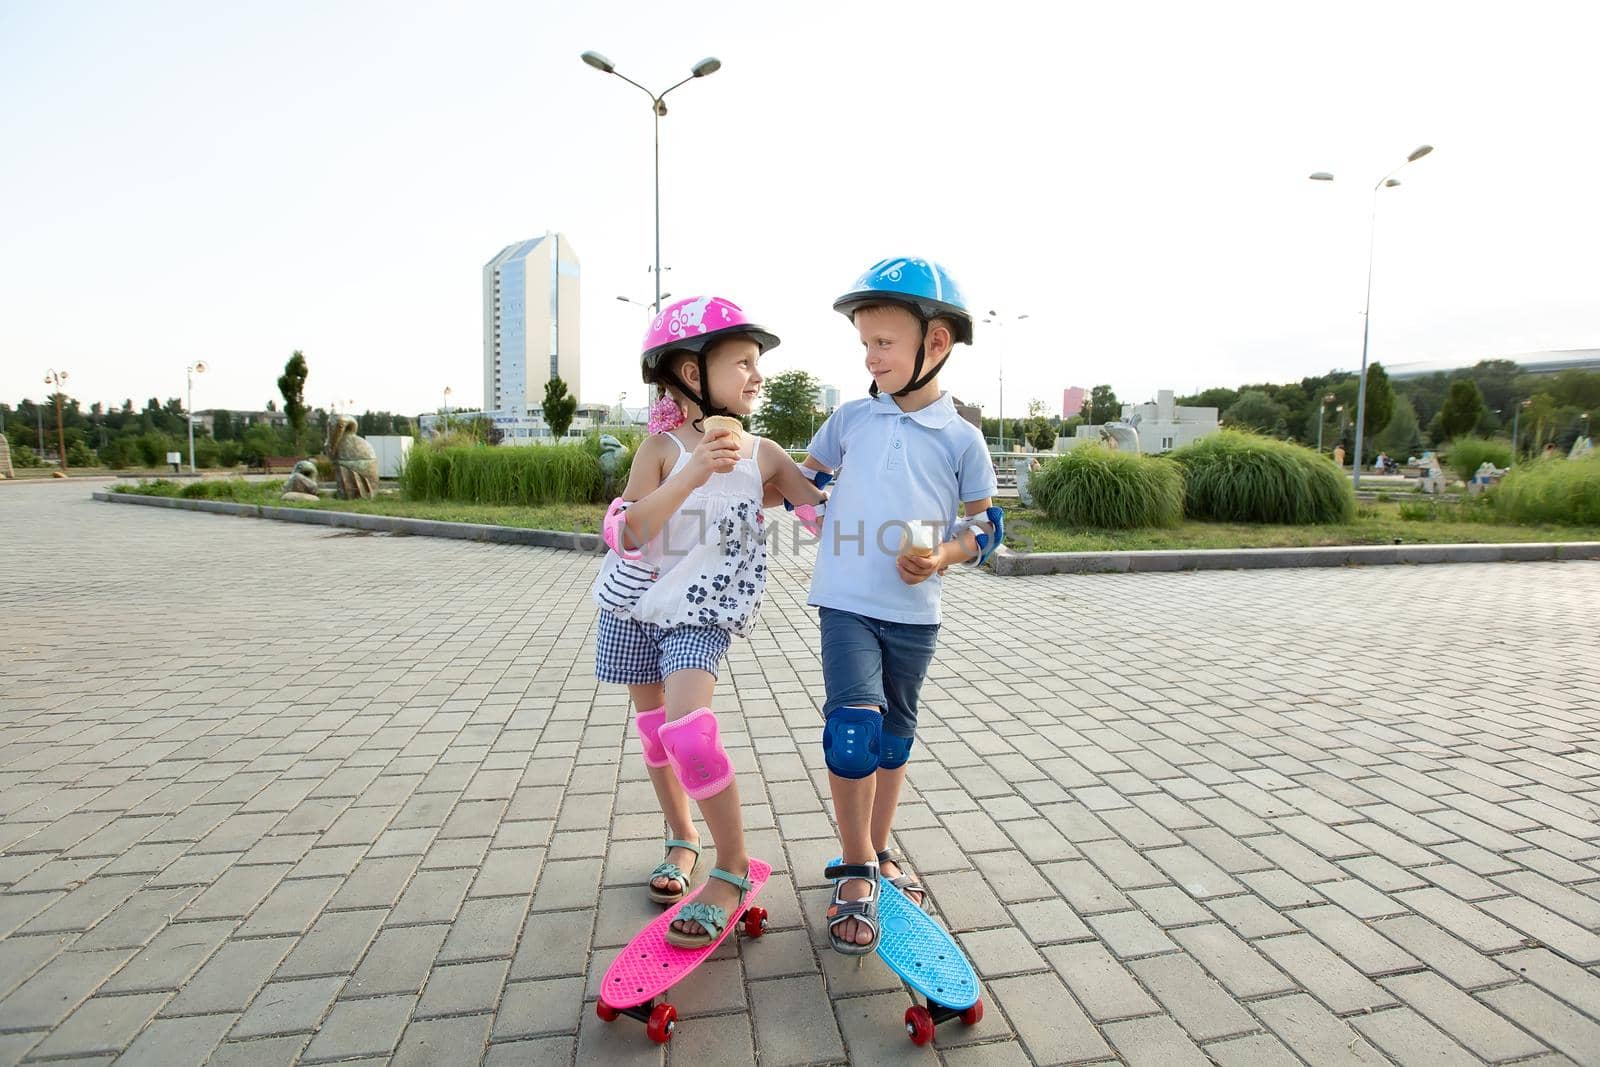 Little boy in a helmet hugs a girl in the Park, they ride a skateboard and eat ice cream. by StudioPeace